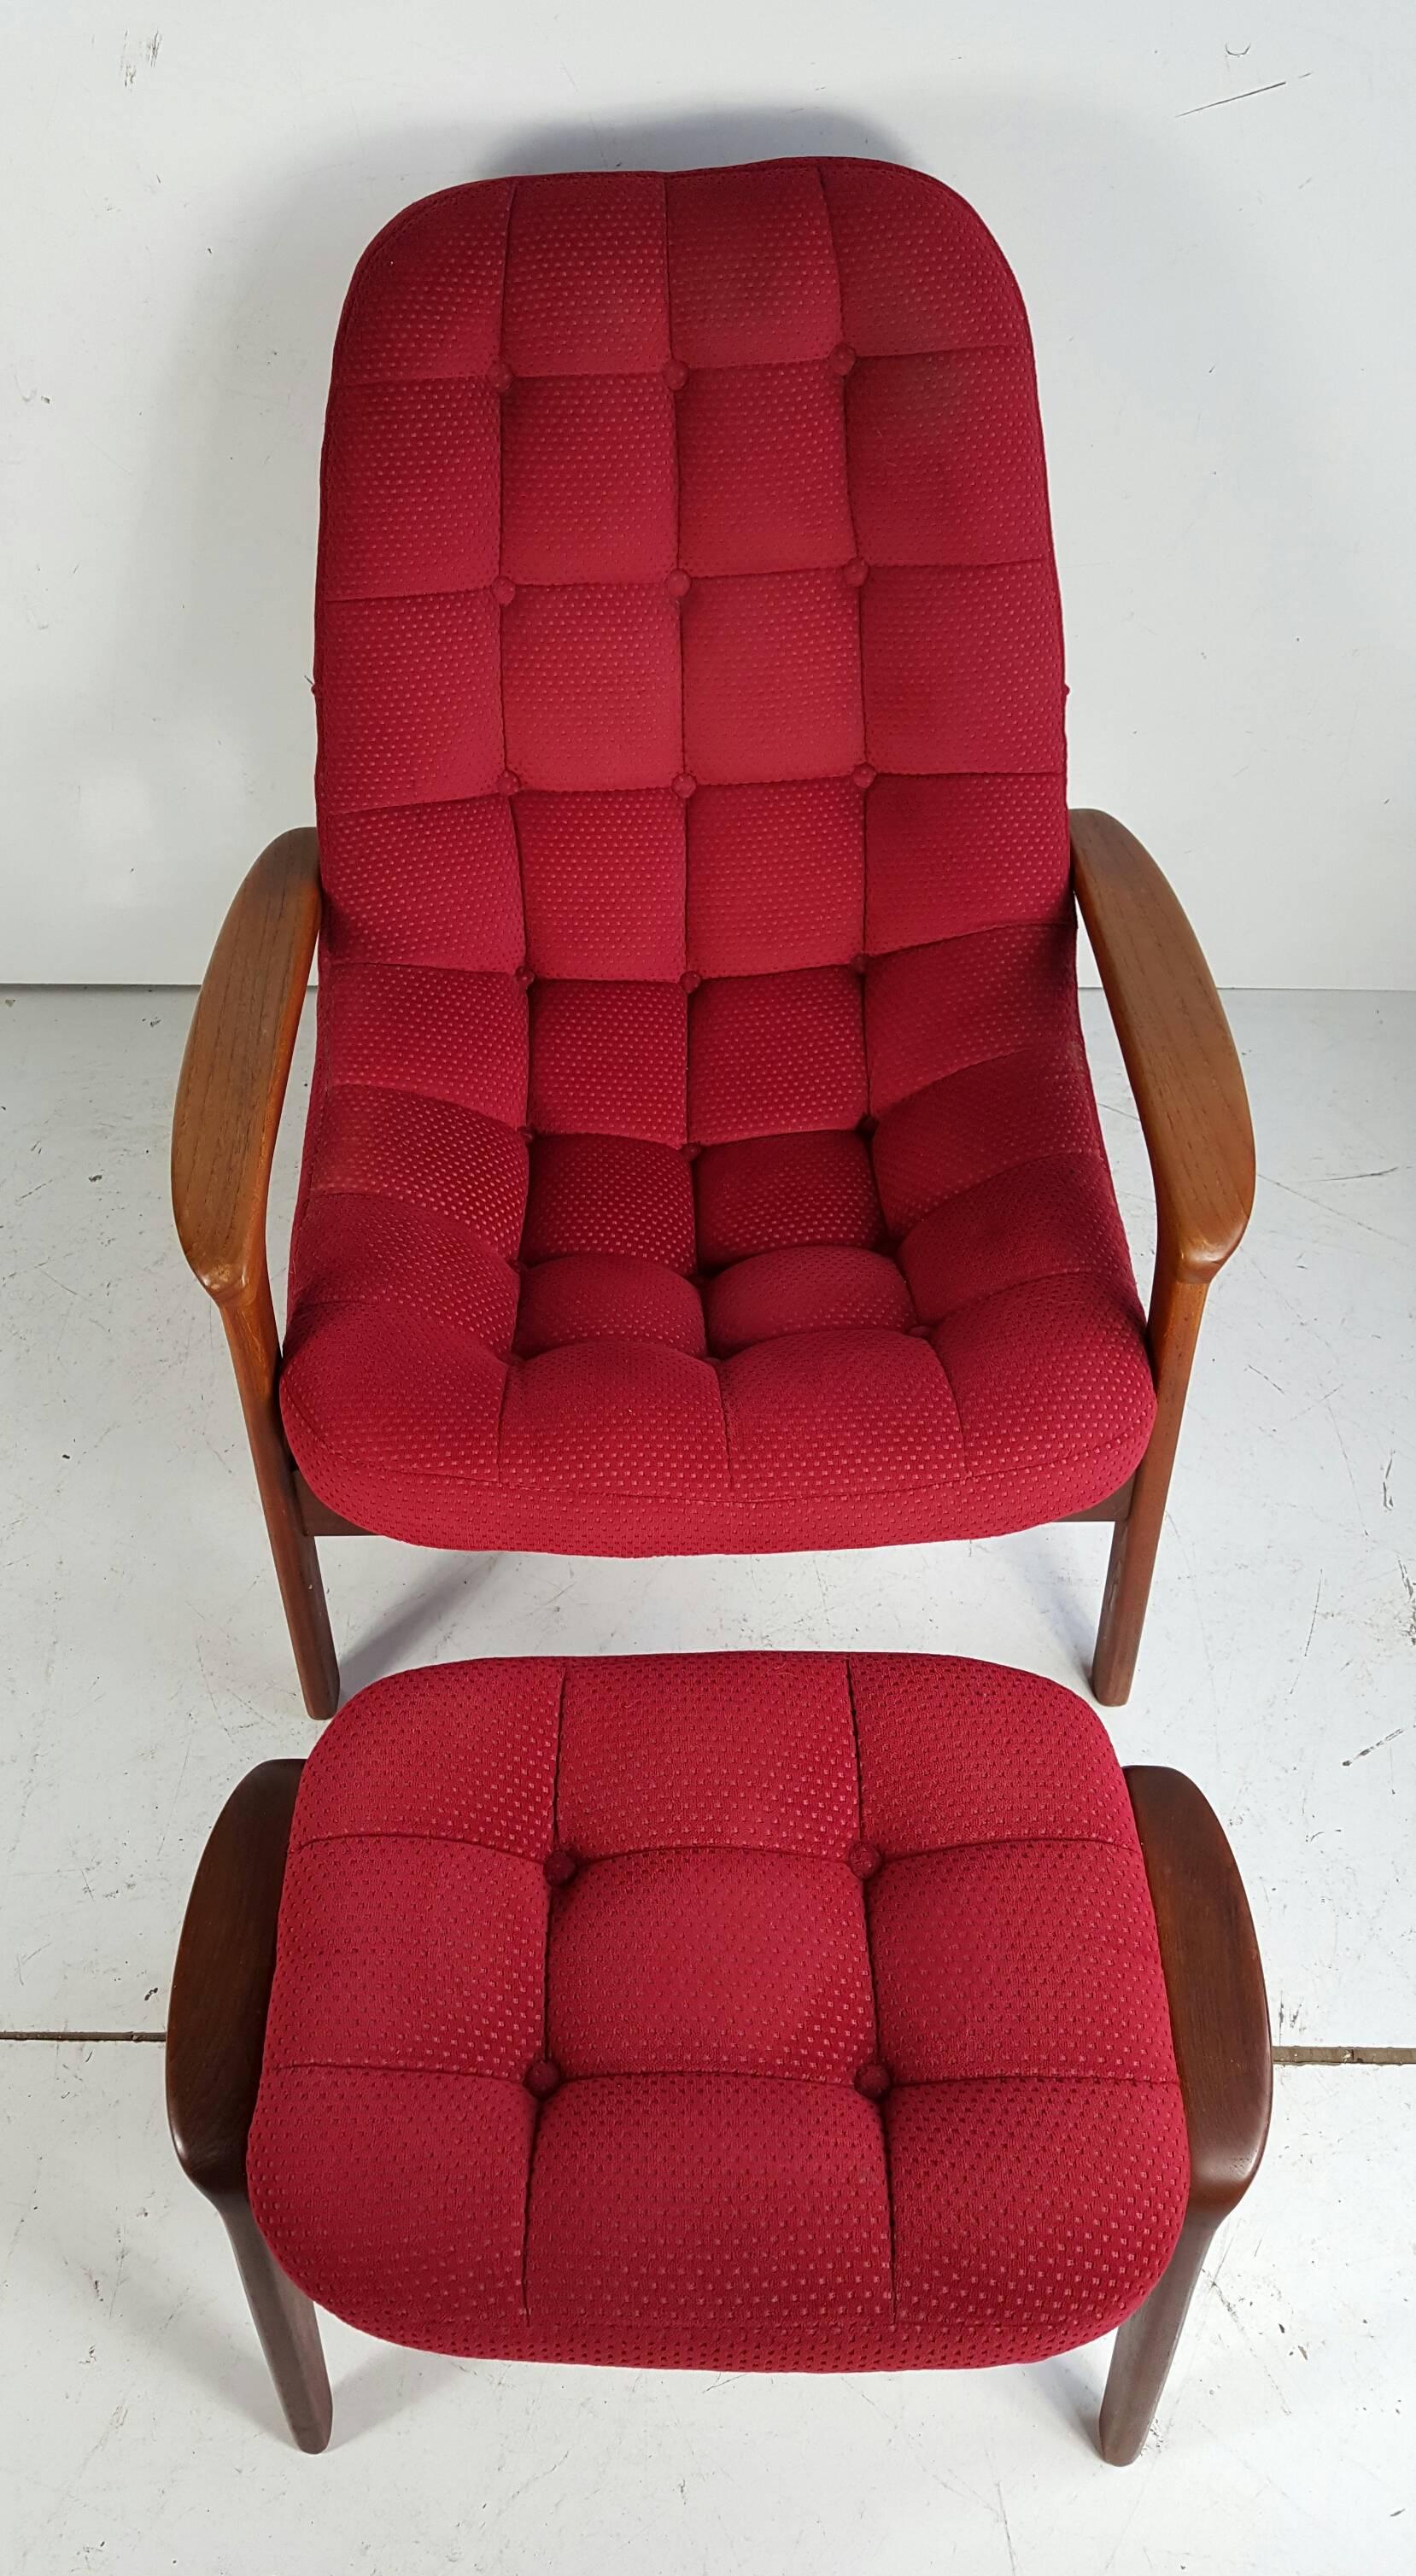 Canadian Teak Lounge Chair by and Ottoman R. Huber, Mid-Century Danish Modern